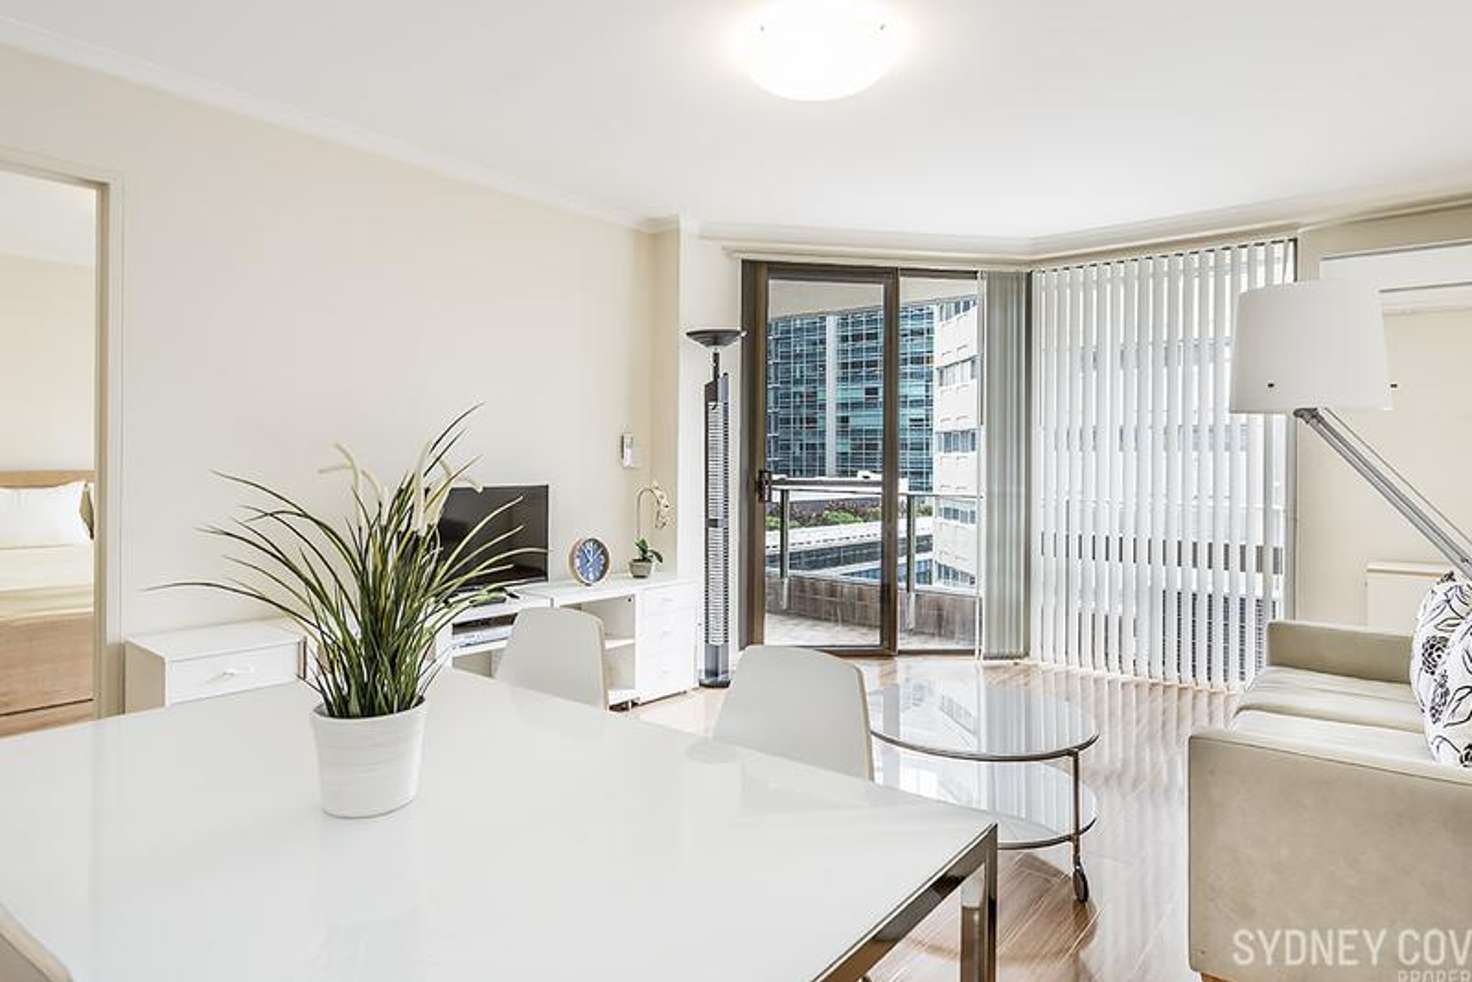 Main view of Homely apartment listing, 25 Market Street, Sydney NSW 2000